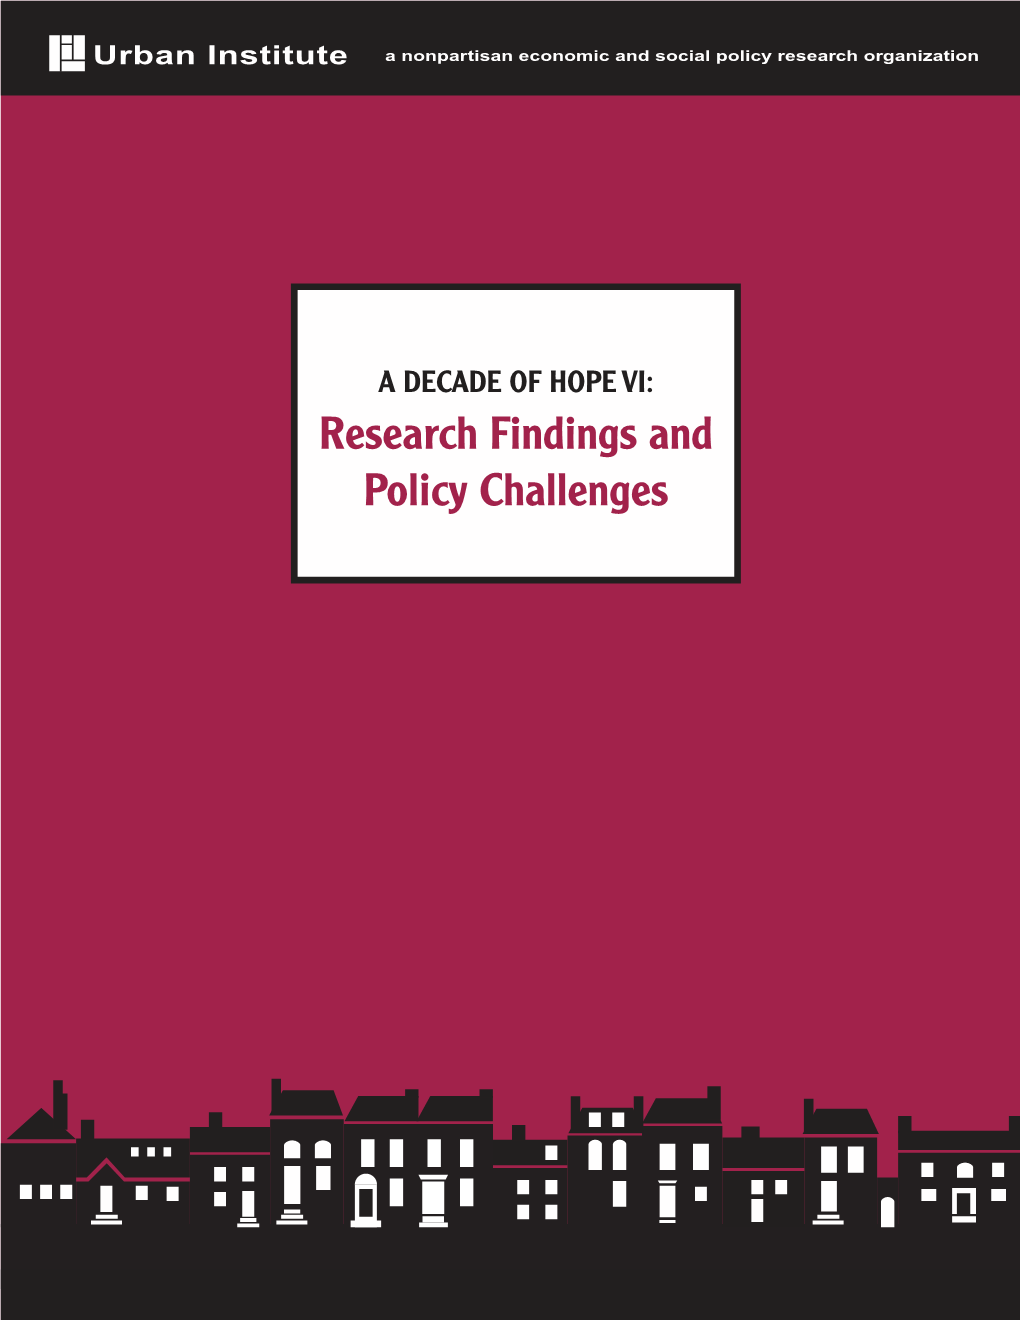 HOPE VI: Research Findings and Policy Challenges a DECADE of HOPE VI: Research Findings and Policy Challenges